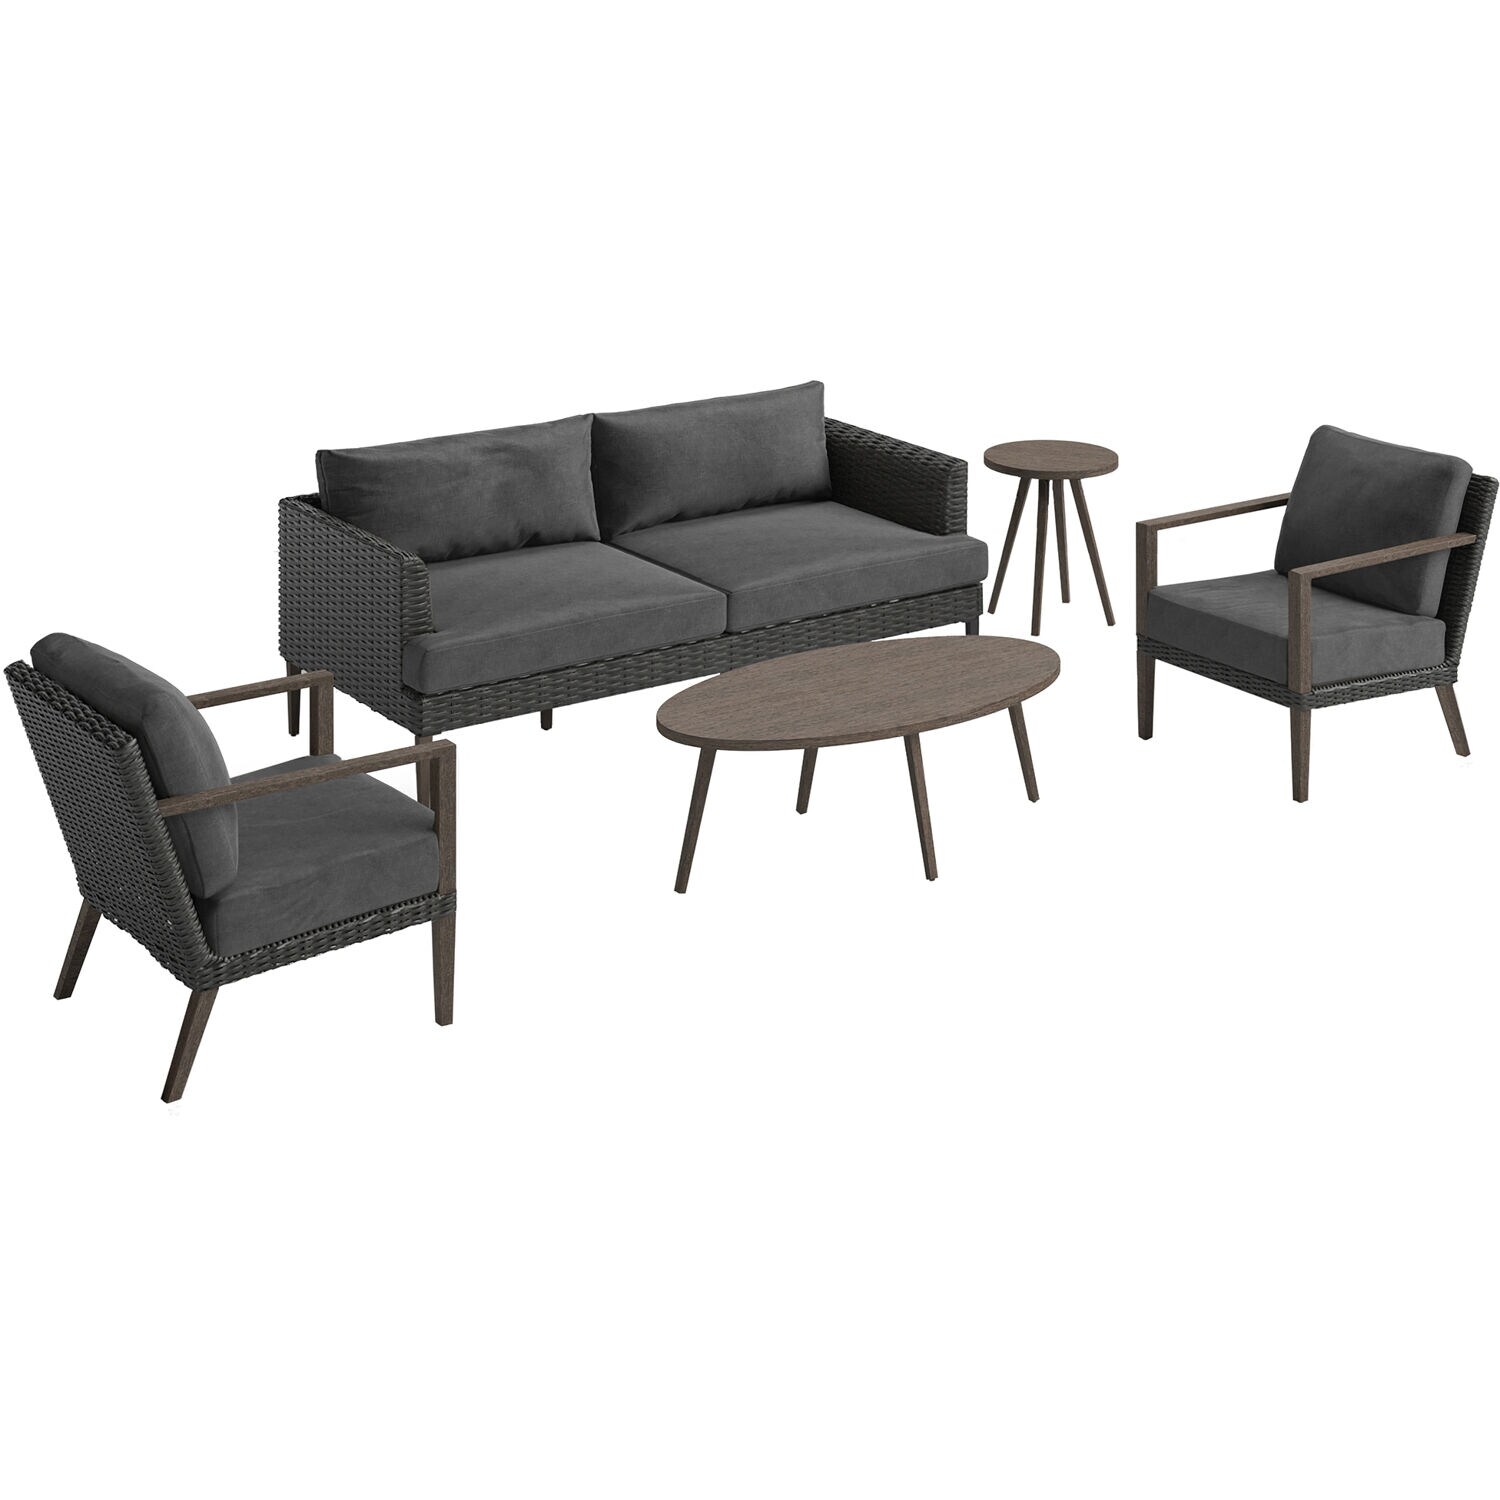 Mod Furniture Traditions 5 Gray Patio Dining Gray Mod in the Patio Dining Sets department at